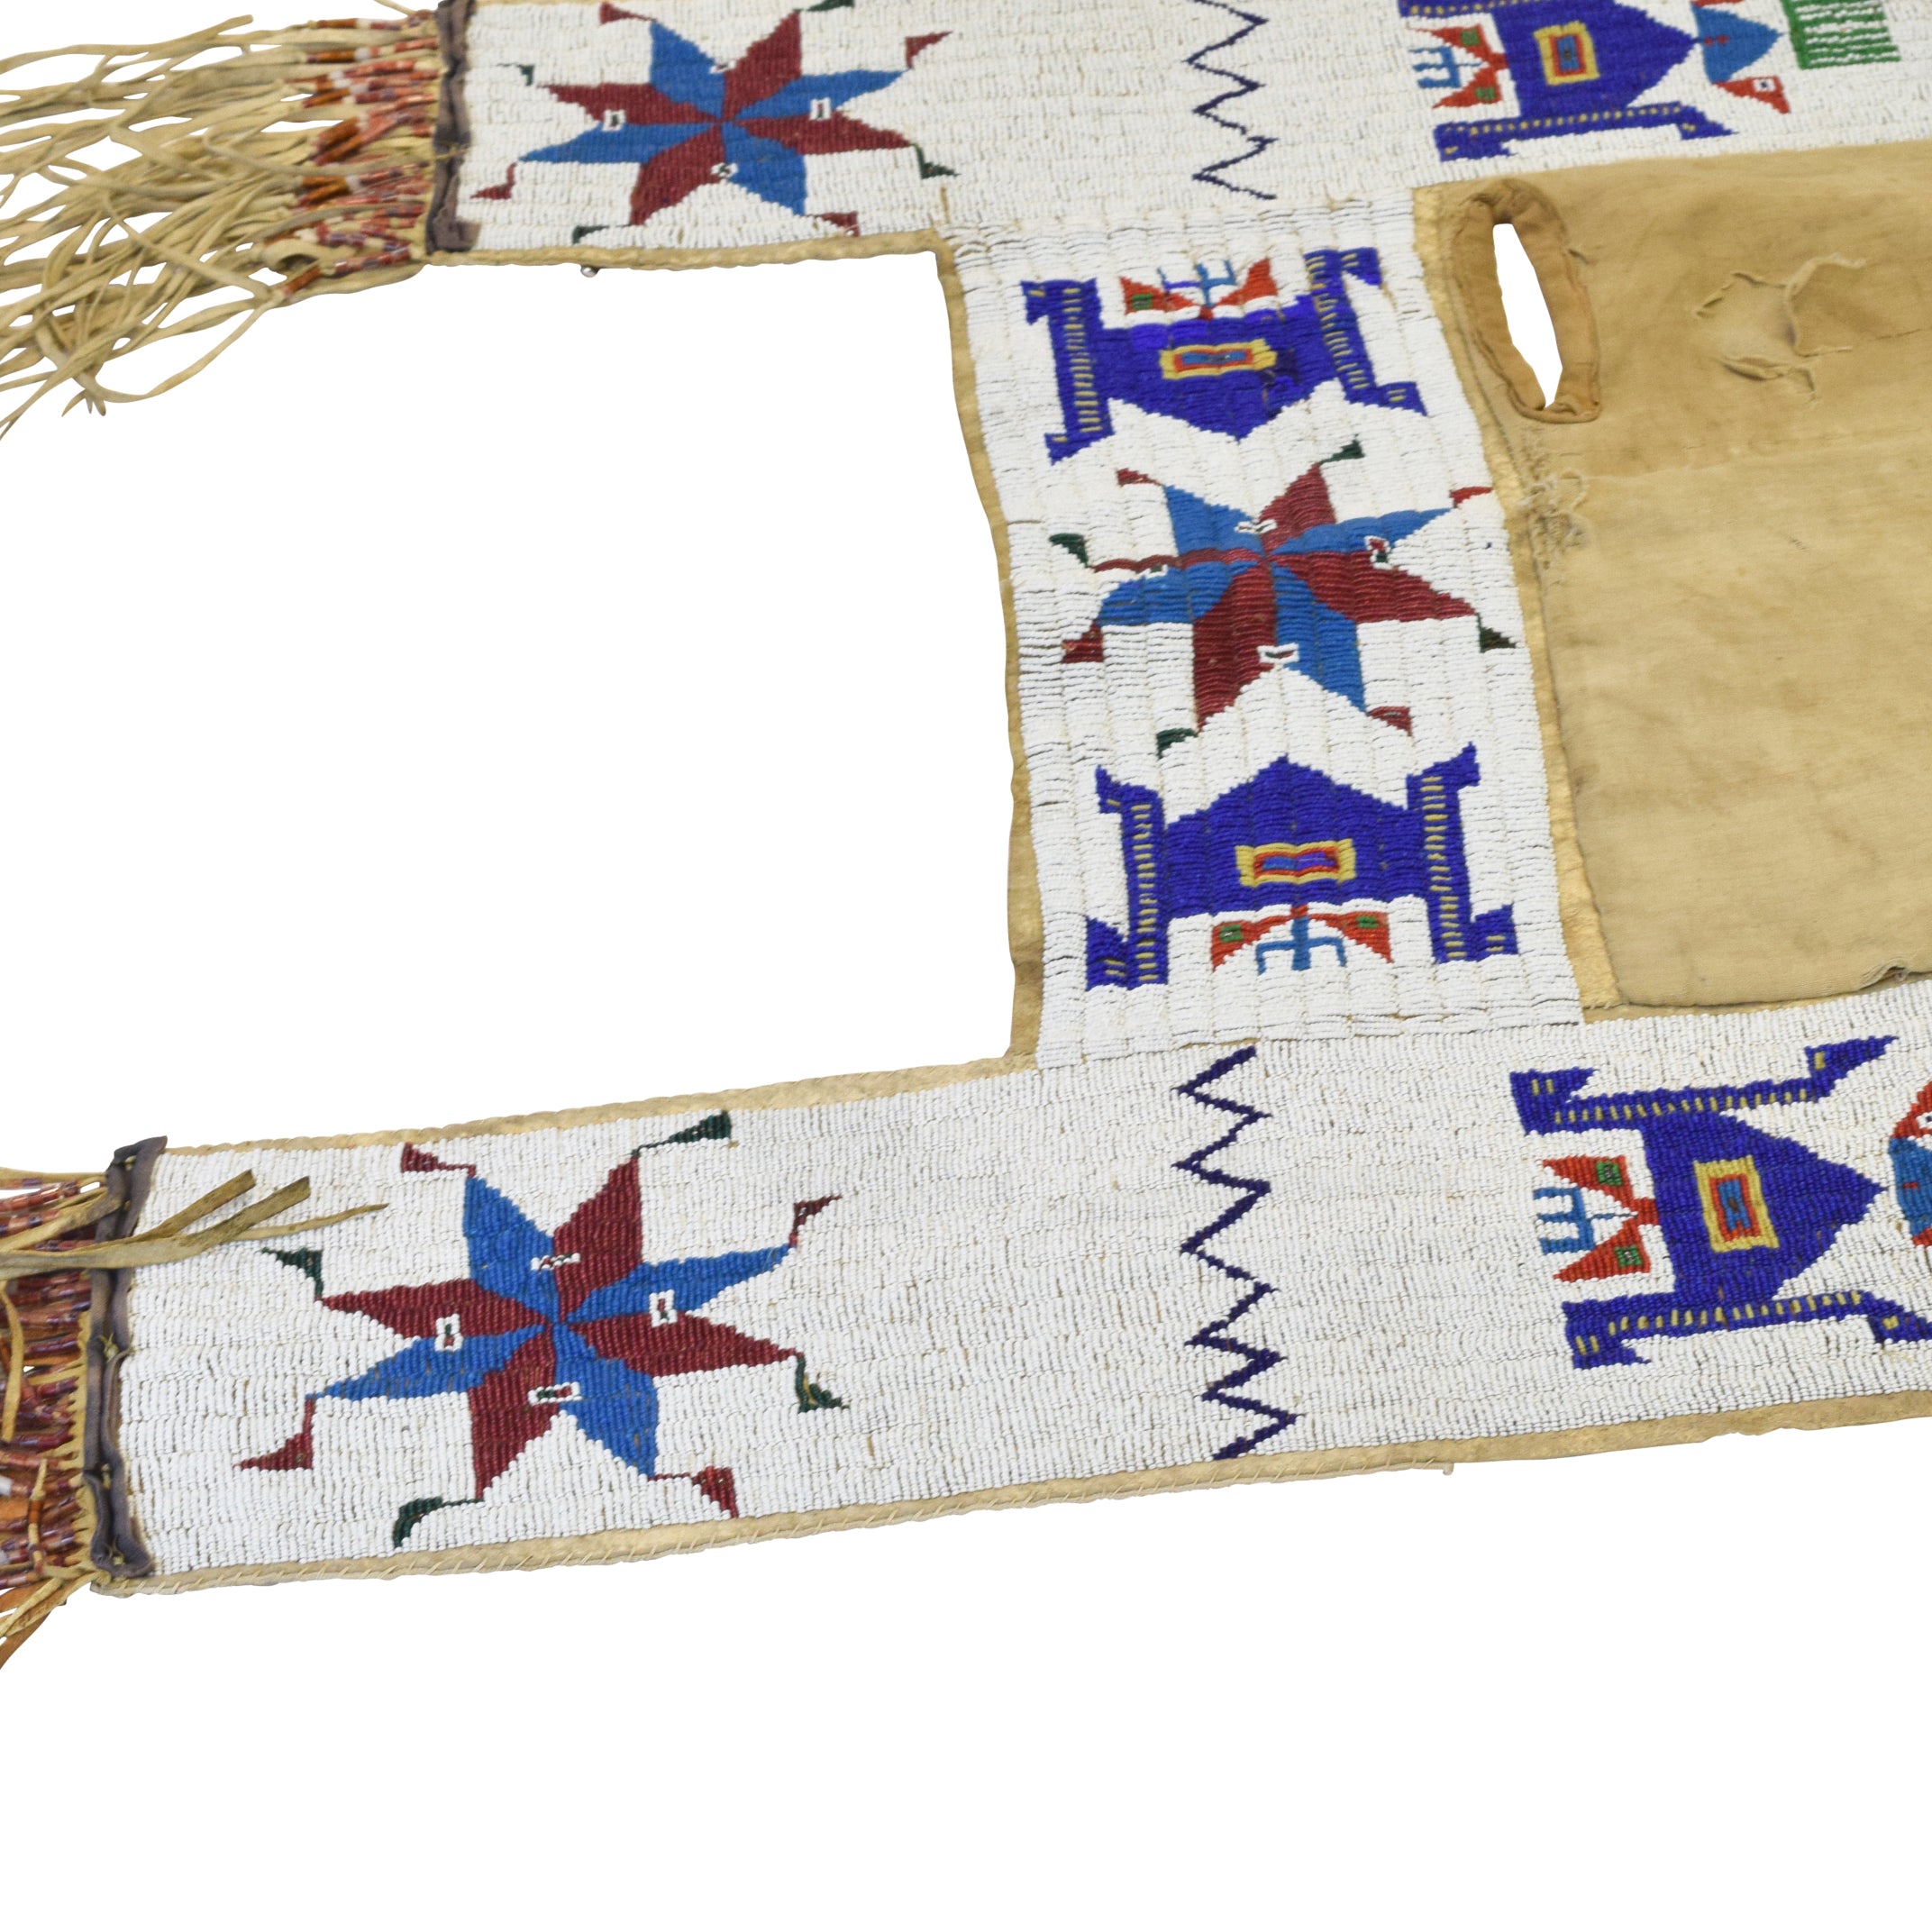 Beaded Sioux Saddle Blanket